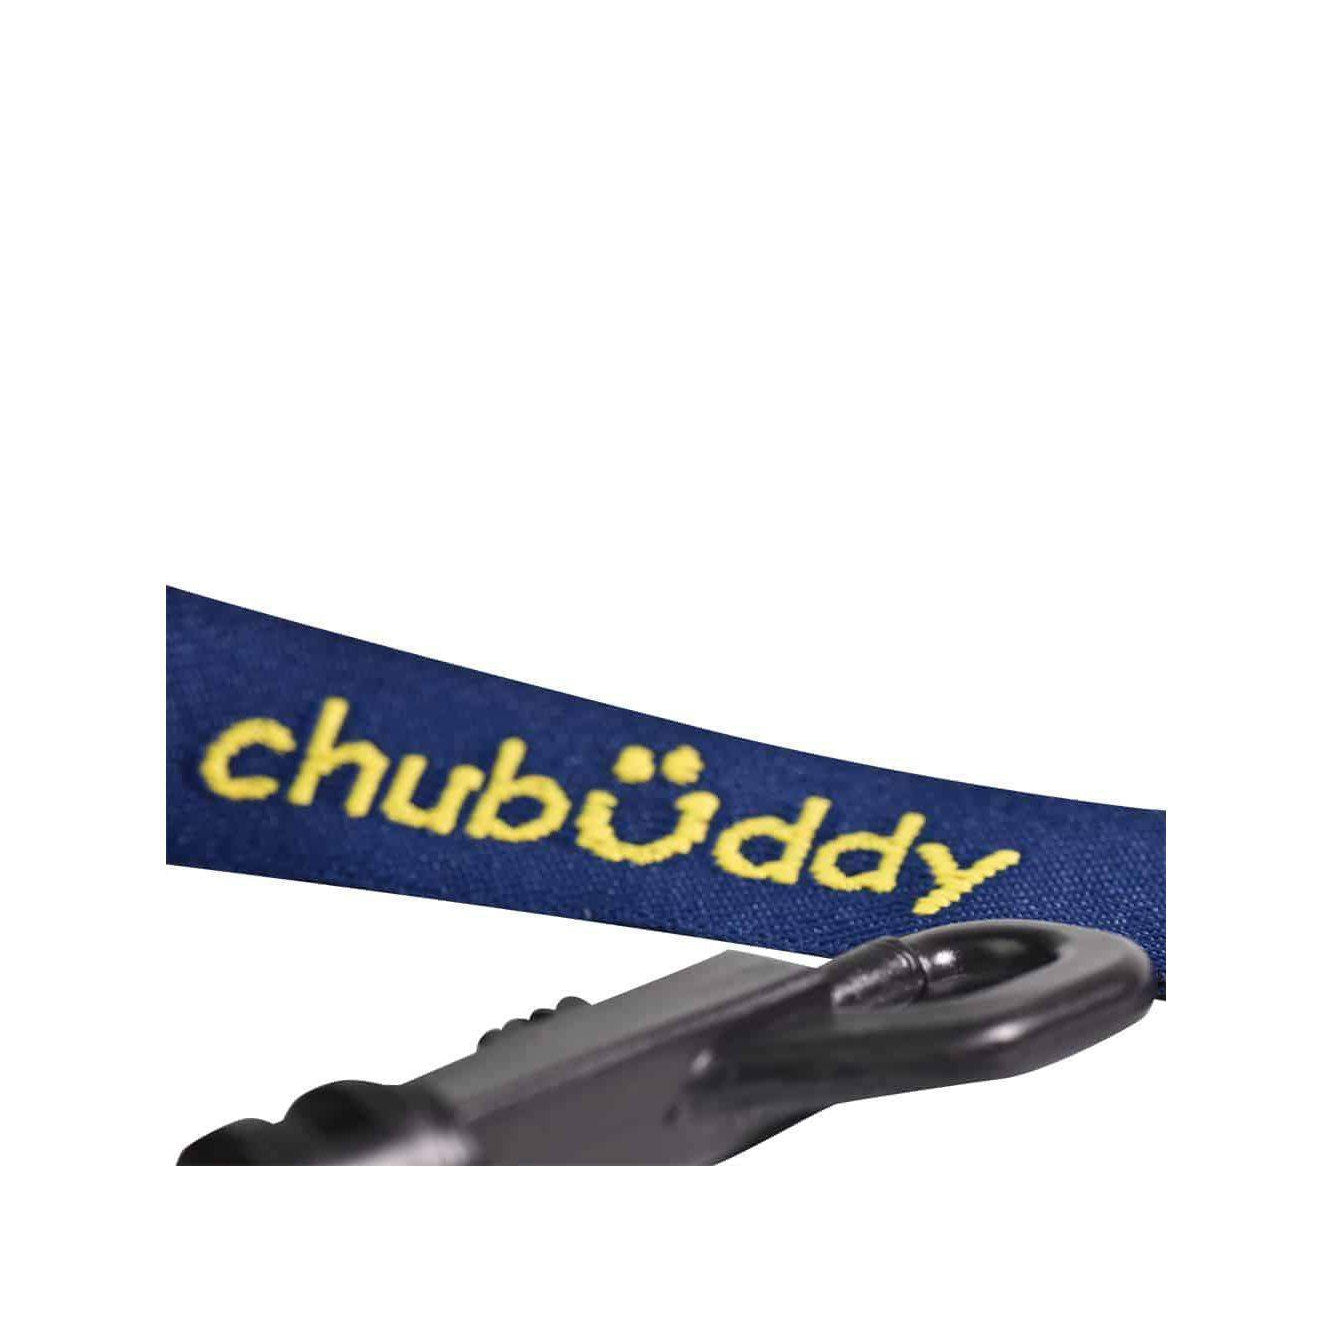 Chew Holder - Navy Embroidered Gold